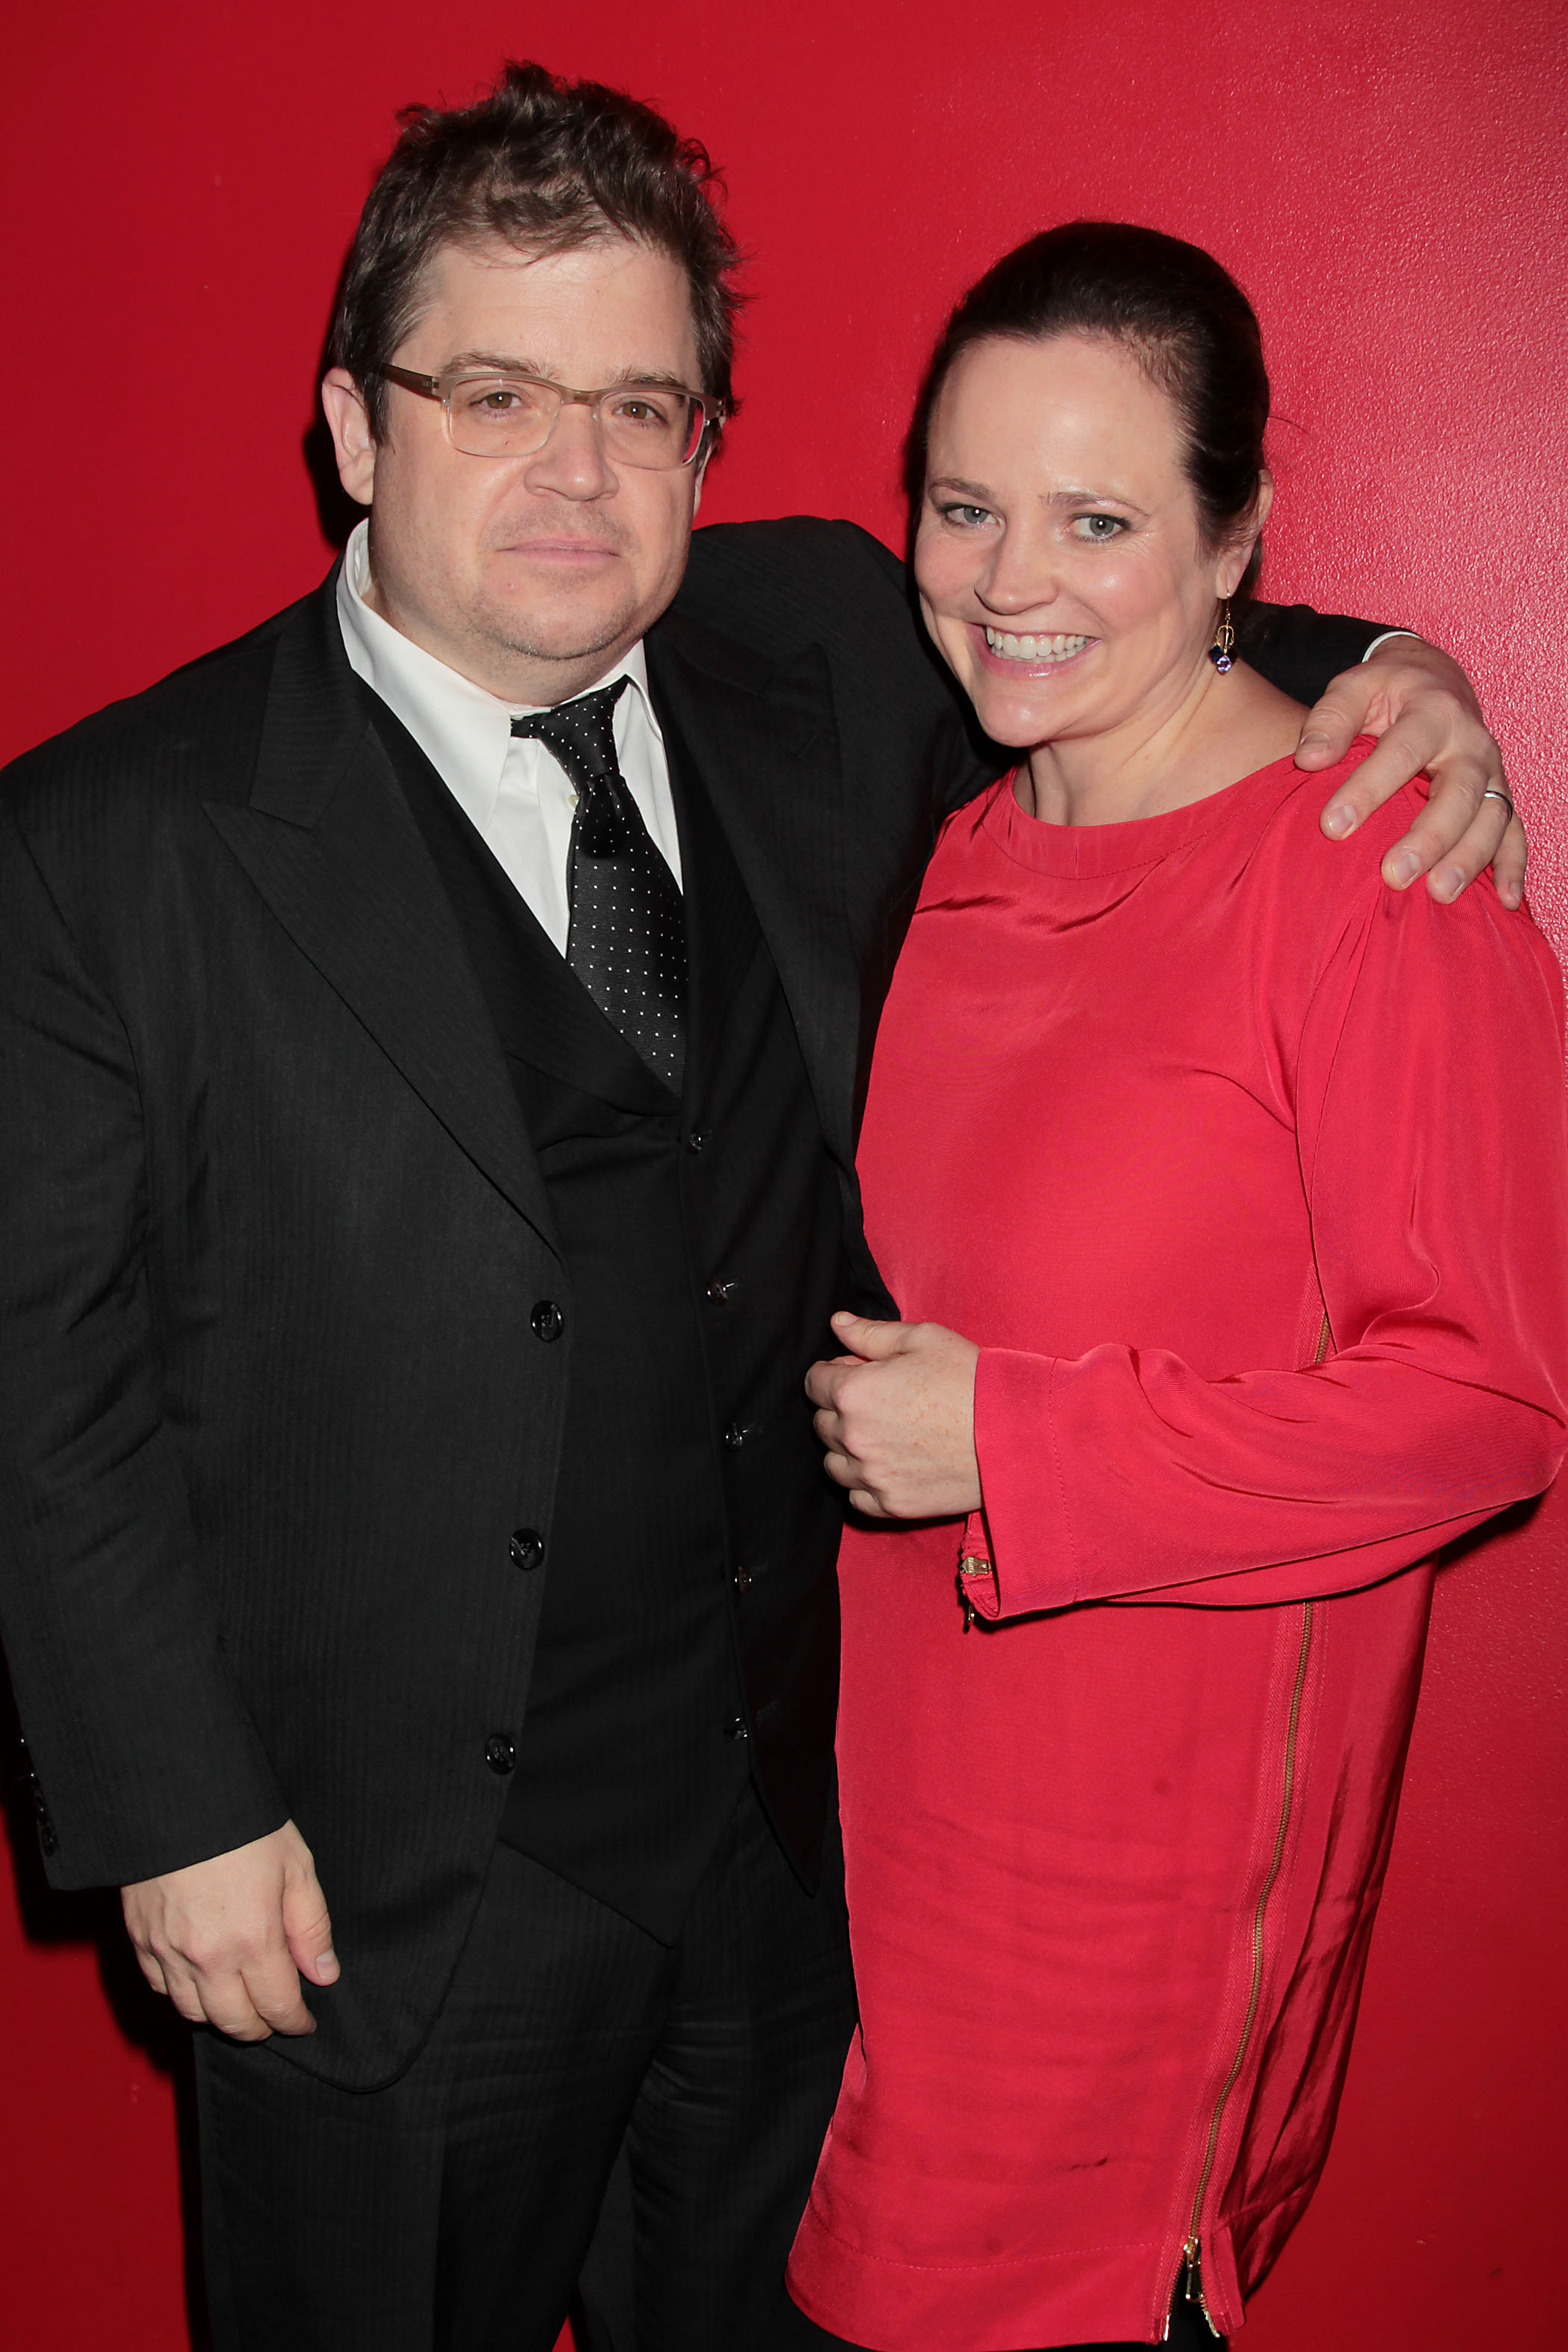 <p>Comedian Patton Oswalt's first wife, true crime author Michelle McNamara, died in her sleep on April 21, 2016, at 46. The "I'll Be Gone in the Dark" writer's death was later attributed to an undiagnosed heart condition combined with the "<em>effects of multiple drugs" including </em>Adderall, Xanax and fentanyl, the coroner confirmed. "Of course I thought of her today," Patton posted on <a href="https://www.instagram.com/p/CN9UcYlFCyK/?utm_source=ig_embed&ig_rid=e3b68199-e04f-46f5-9d62-ec5f9ba9d89f">Instagram</a> on the five-year anniversary of her passing. "And I also thought of [our daughter] Alice, and how the loss shaped her and continues to shape her. And how Meredith [Salenger, whom I married in 2017] swooped into our lonely, broken lives and helped put the pieces back together, stronger and sleeker than they were before. This dark day gets a little less dark every year when I see how Alice — a living piece of Michelle safe in the hands of Meredith — keeps walking in light. I'm there to catch the shadows that try to creep in at the edges, or from behind. I'm good at spotting them, and then Alice helps me laugh them away. And what's left is this beautiful, living memory."</p>